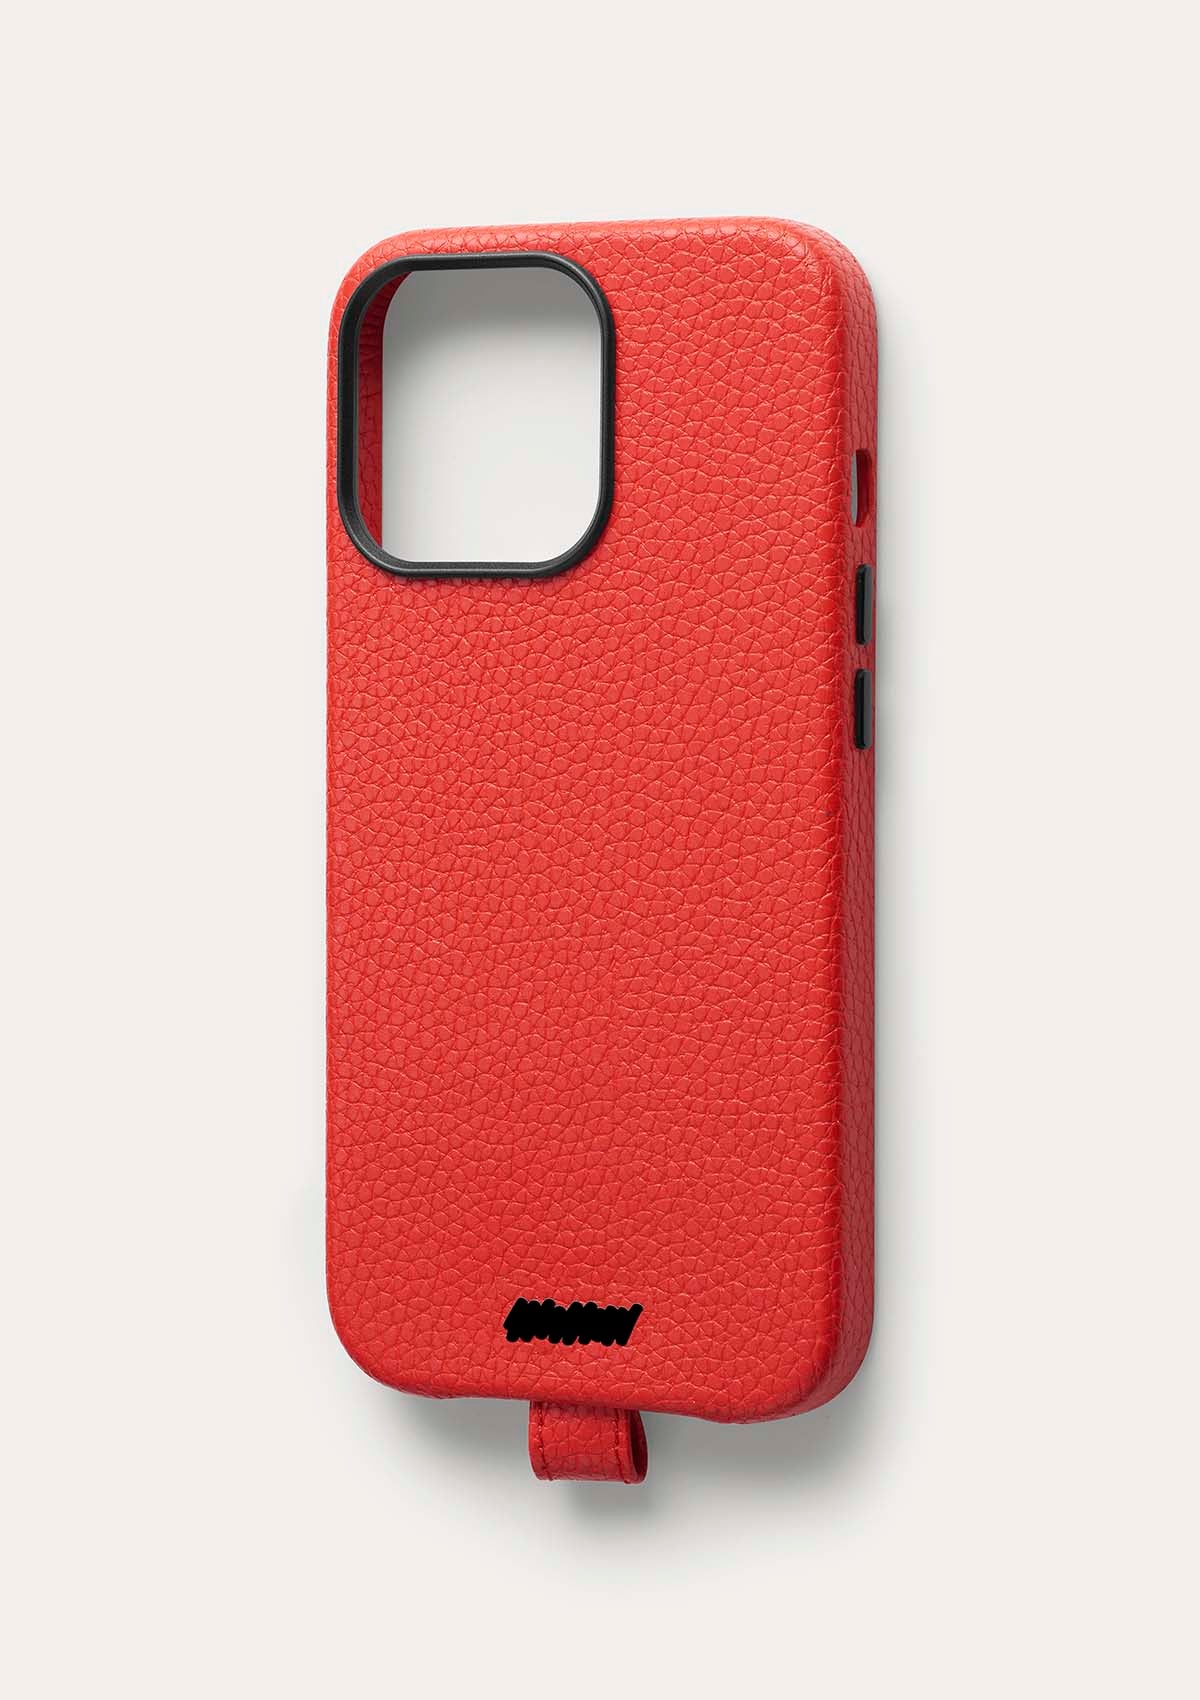 Cover iPhone 14 Pro Palette - rossa